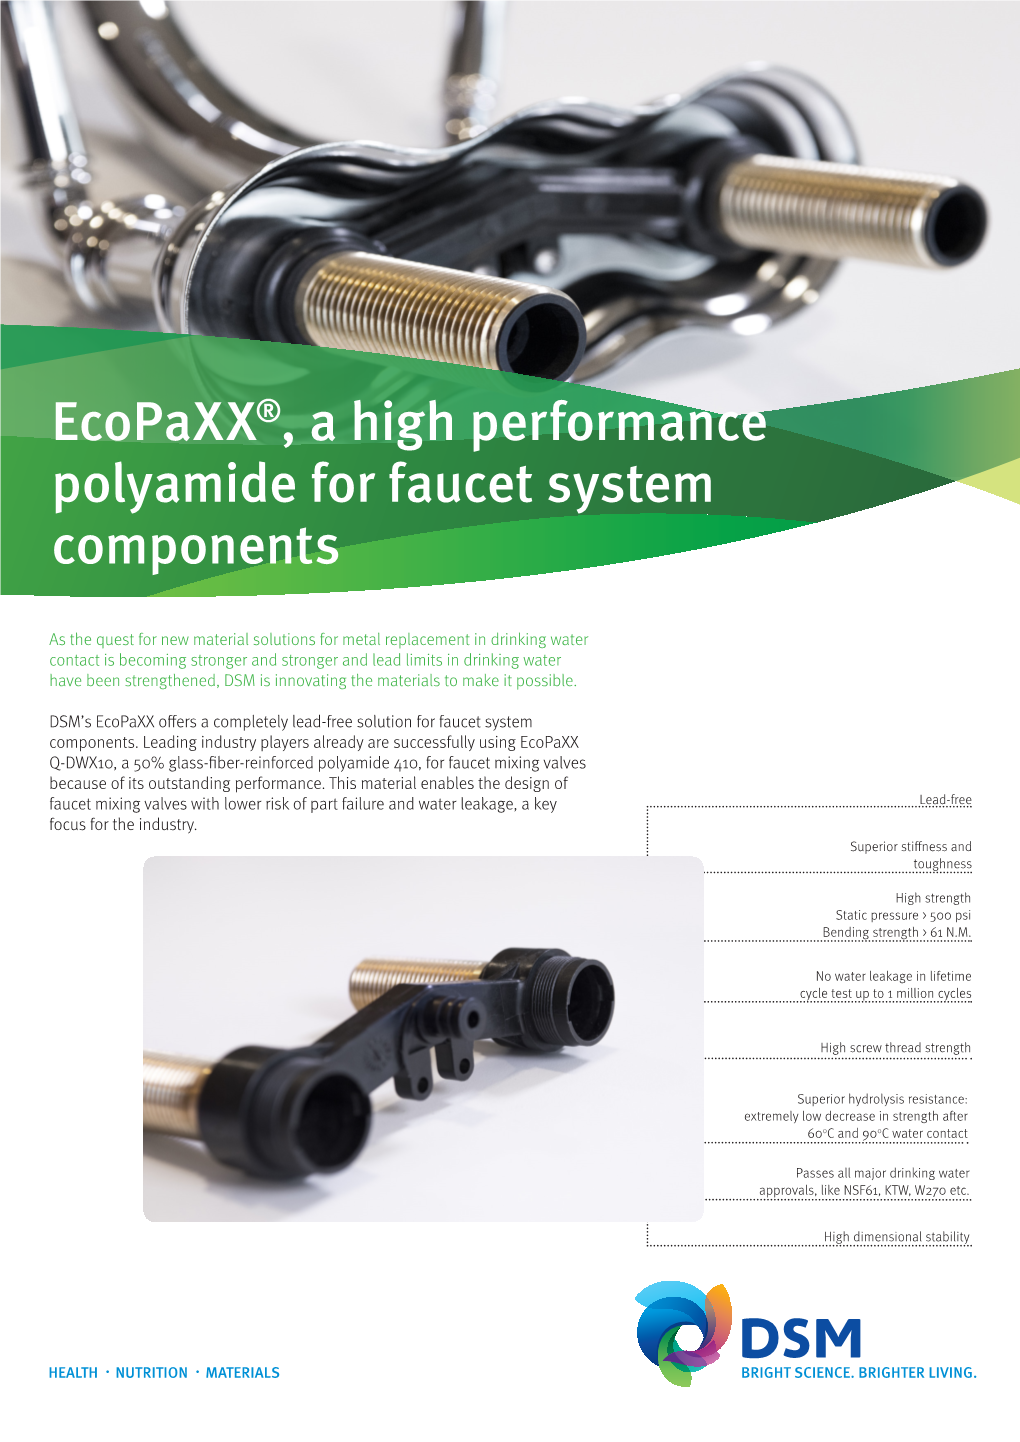 Ecopaxx®, a High Performance Polyamide for Faucet System Components